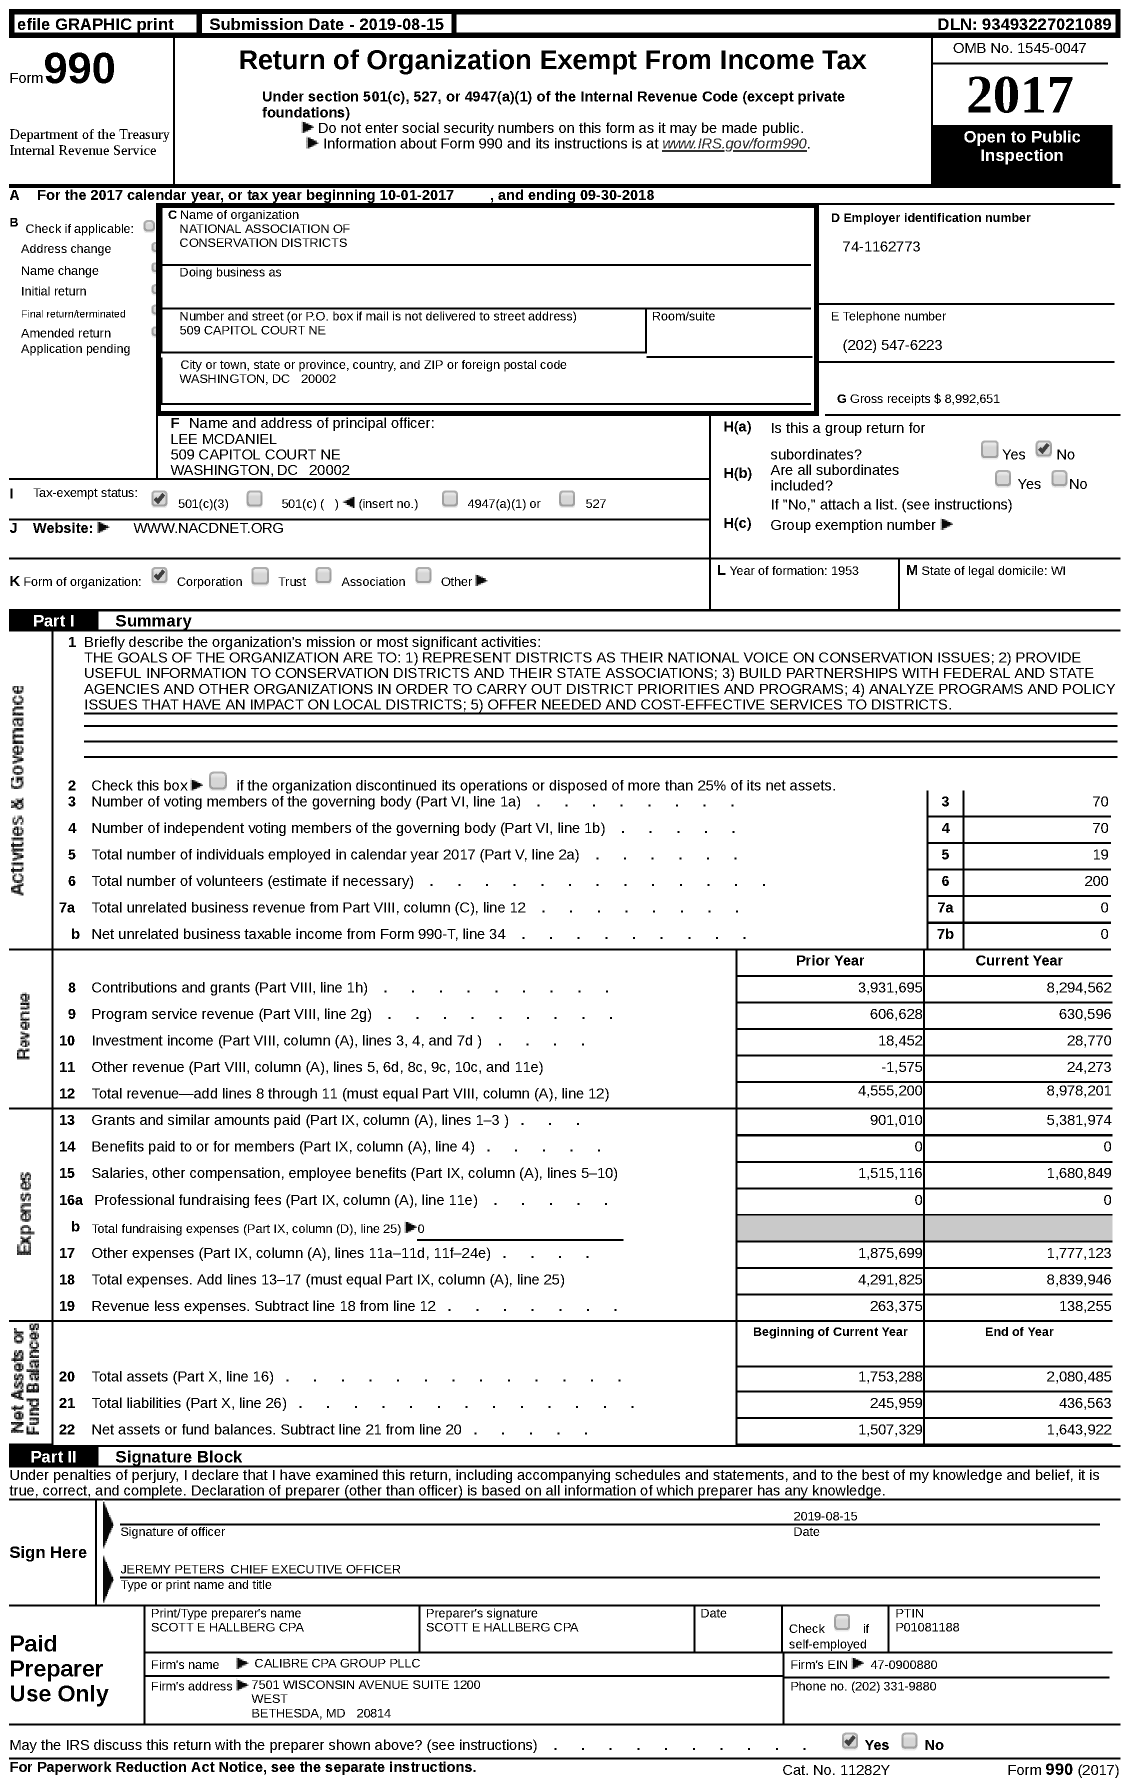 Image of first page of 2017 Form 990 for National Association of Conservation Districts